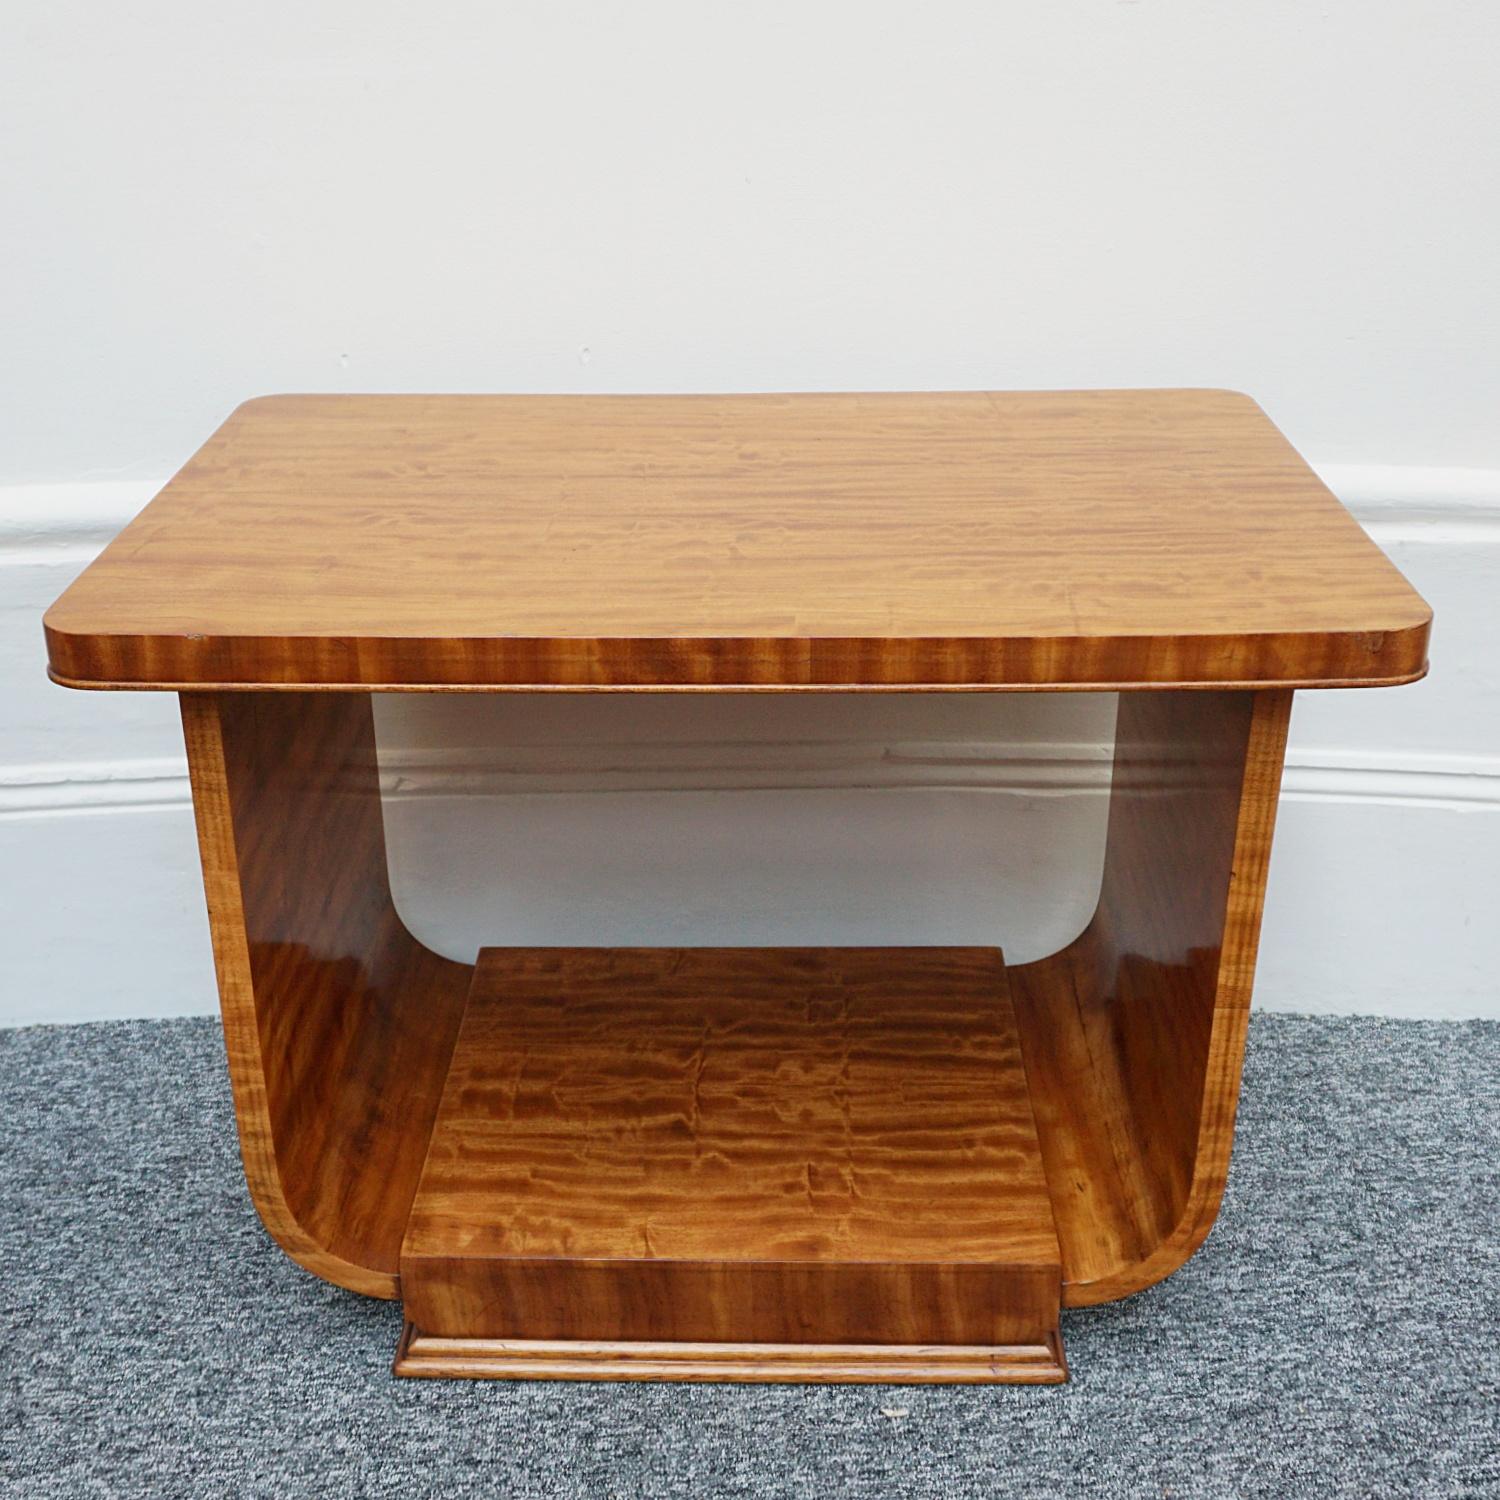 An Art Deco side table. Walnut veneered with a stepped base.

Dimensions: H 51.5cm W 68.5cm D 44.5cm

Origin: English

Date: circa 1935

Item Number: 0206231.